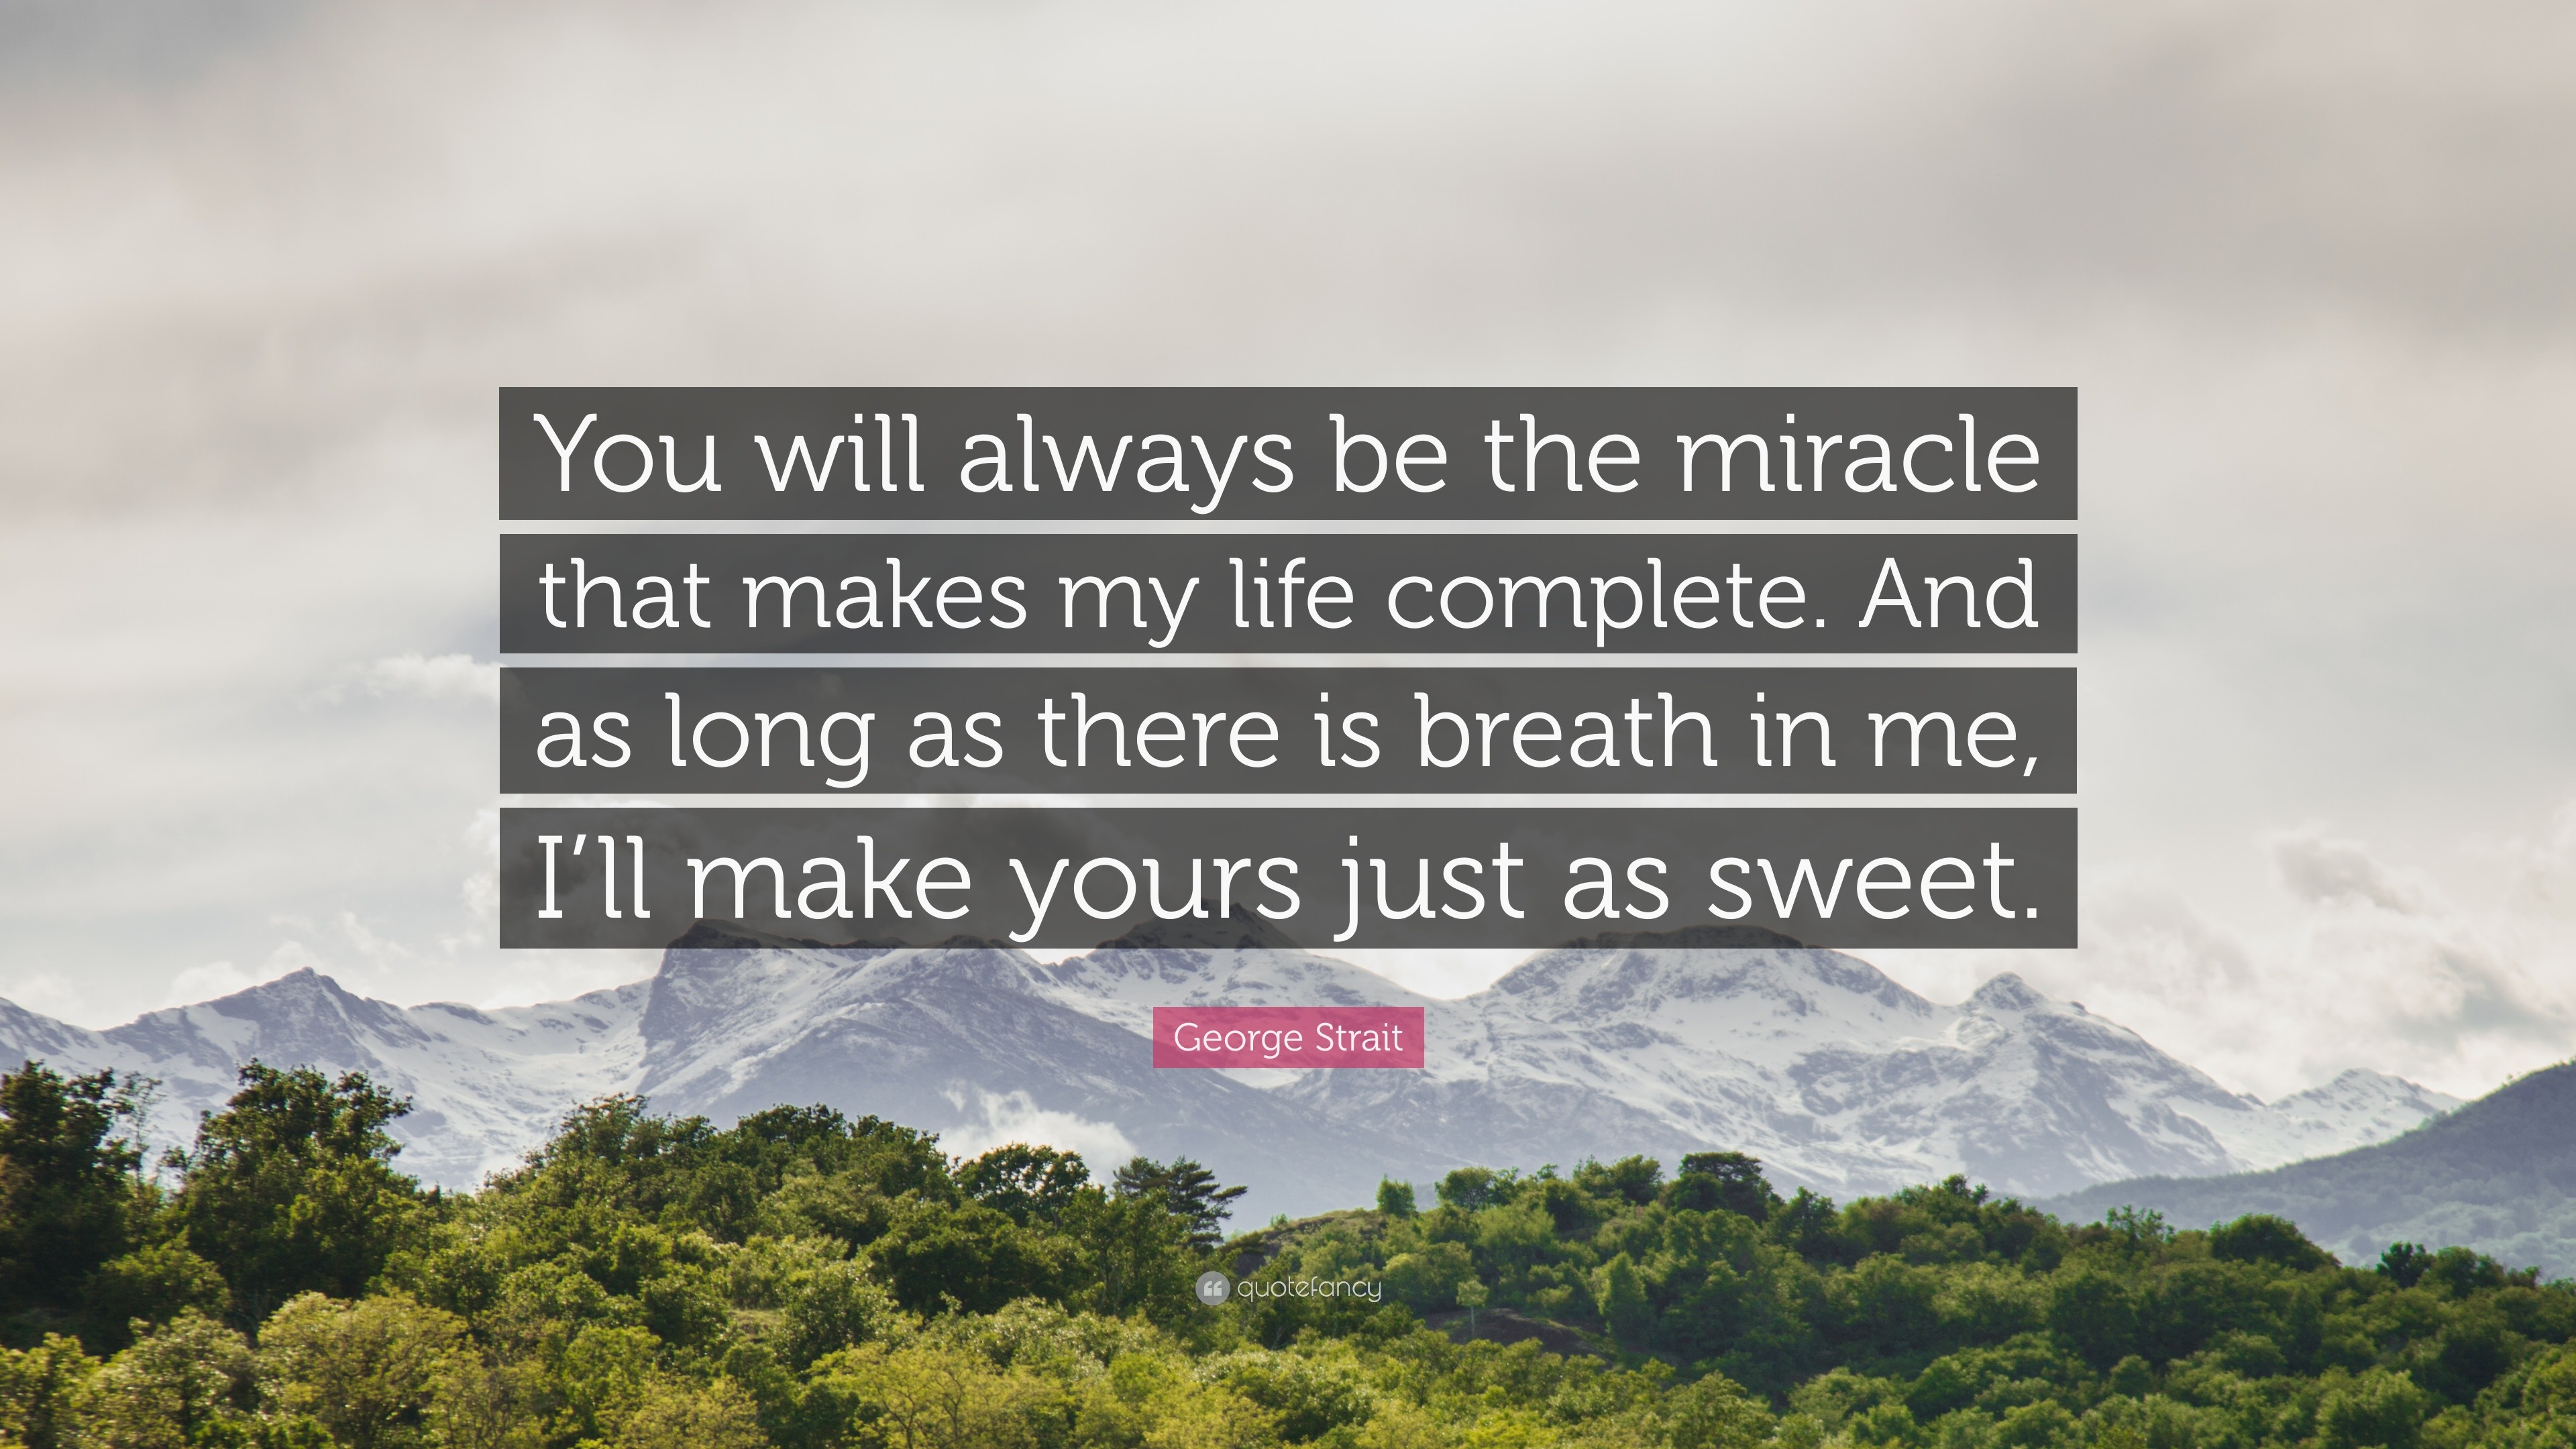 George Strait Quote “You will always be the miracle that makes my life plete